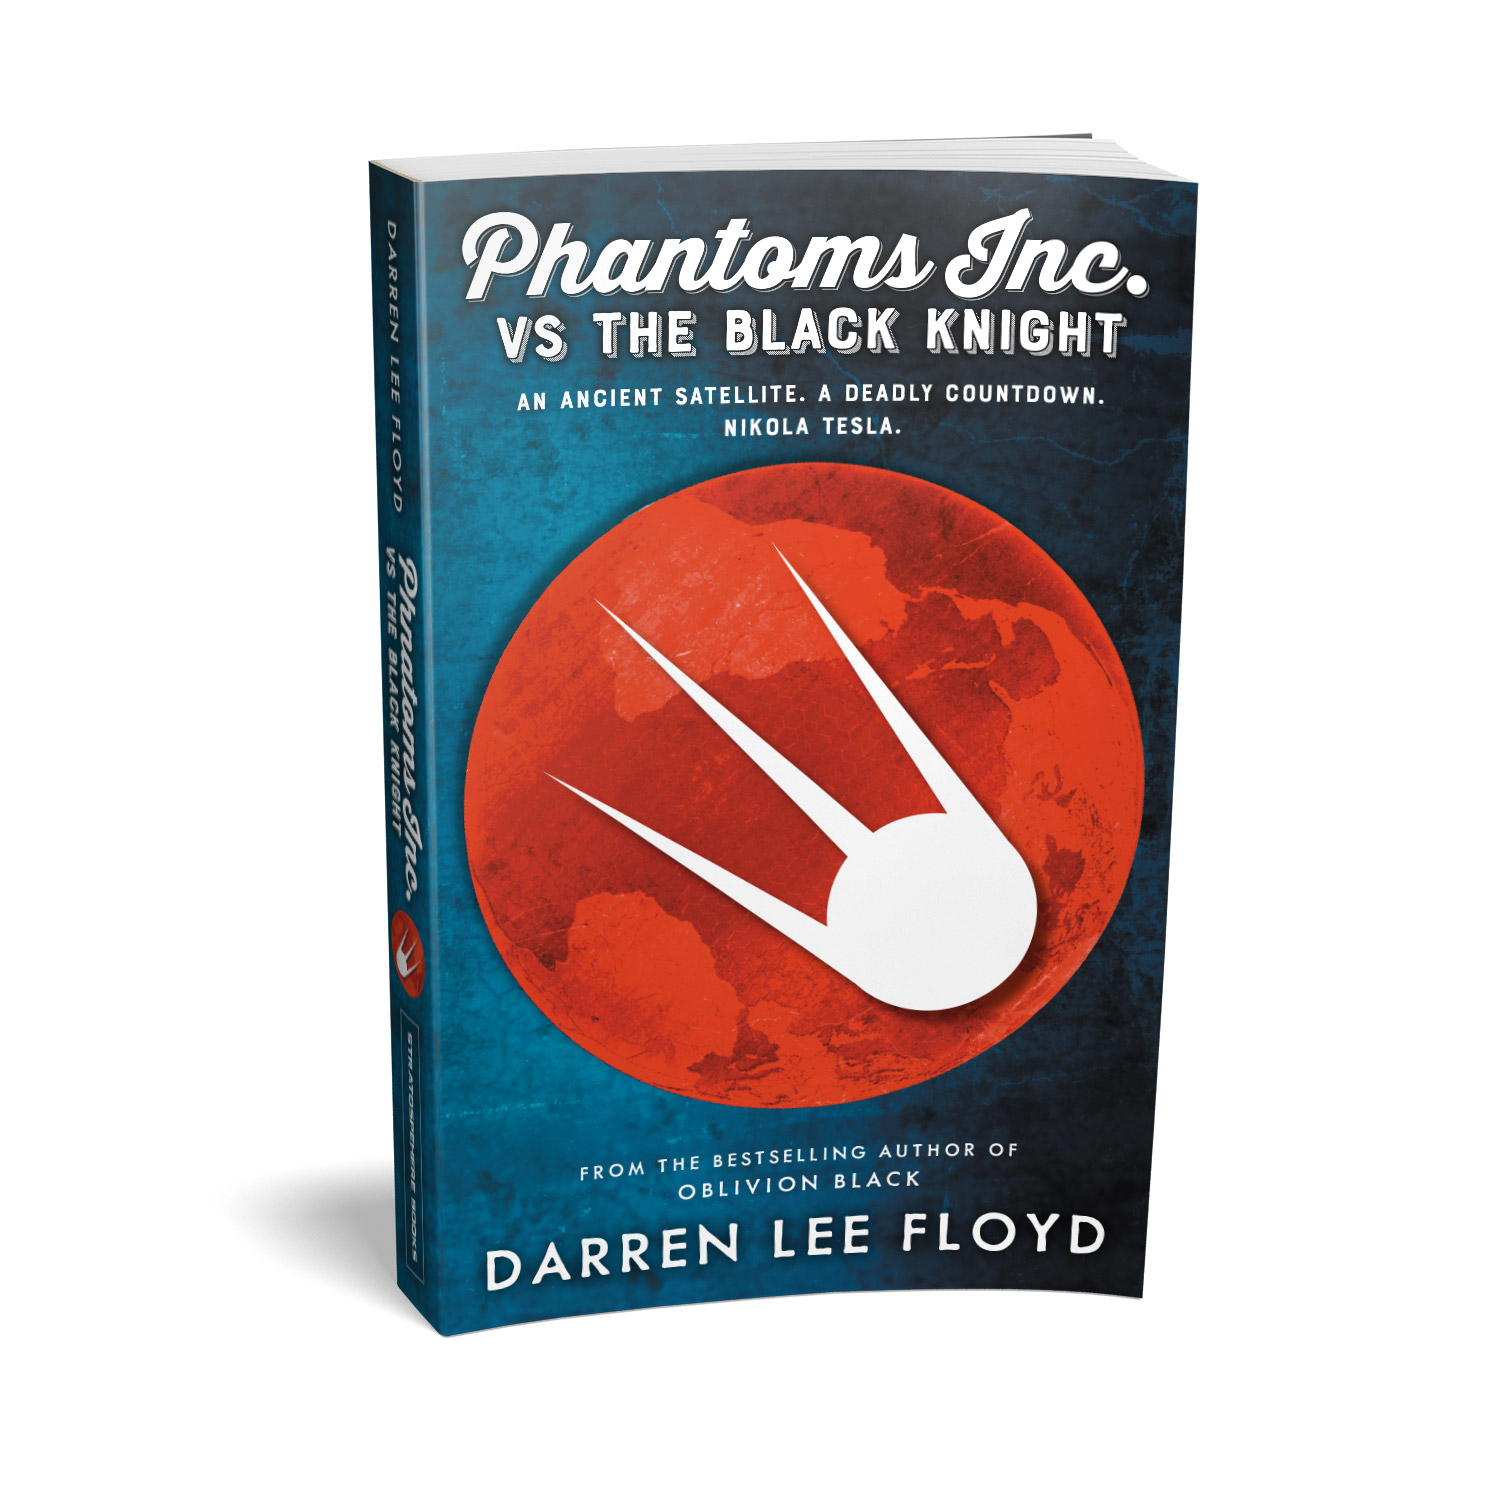 'Phantoms Inc. Vs The Black Knight' is a fun scifi / supernatural hybrid novel. The author is Darren Lee Floyd. The cover and interior design of the book are by Mark Thomas. To learn more about what Mark could do for your book, please visit coverness.com.